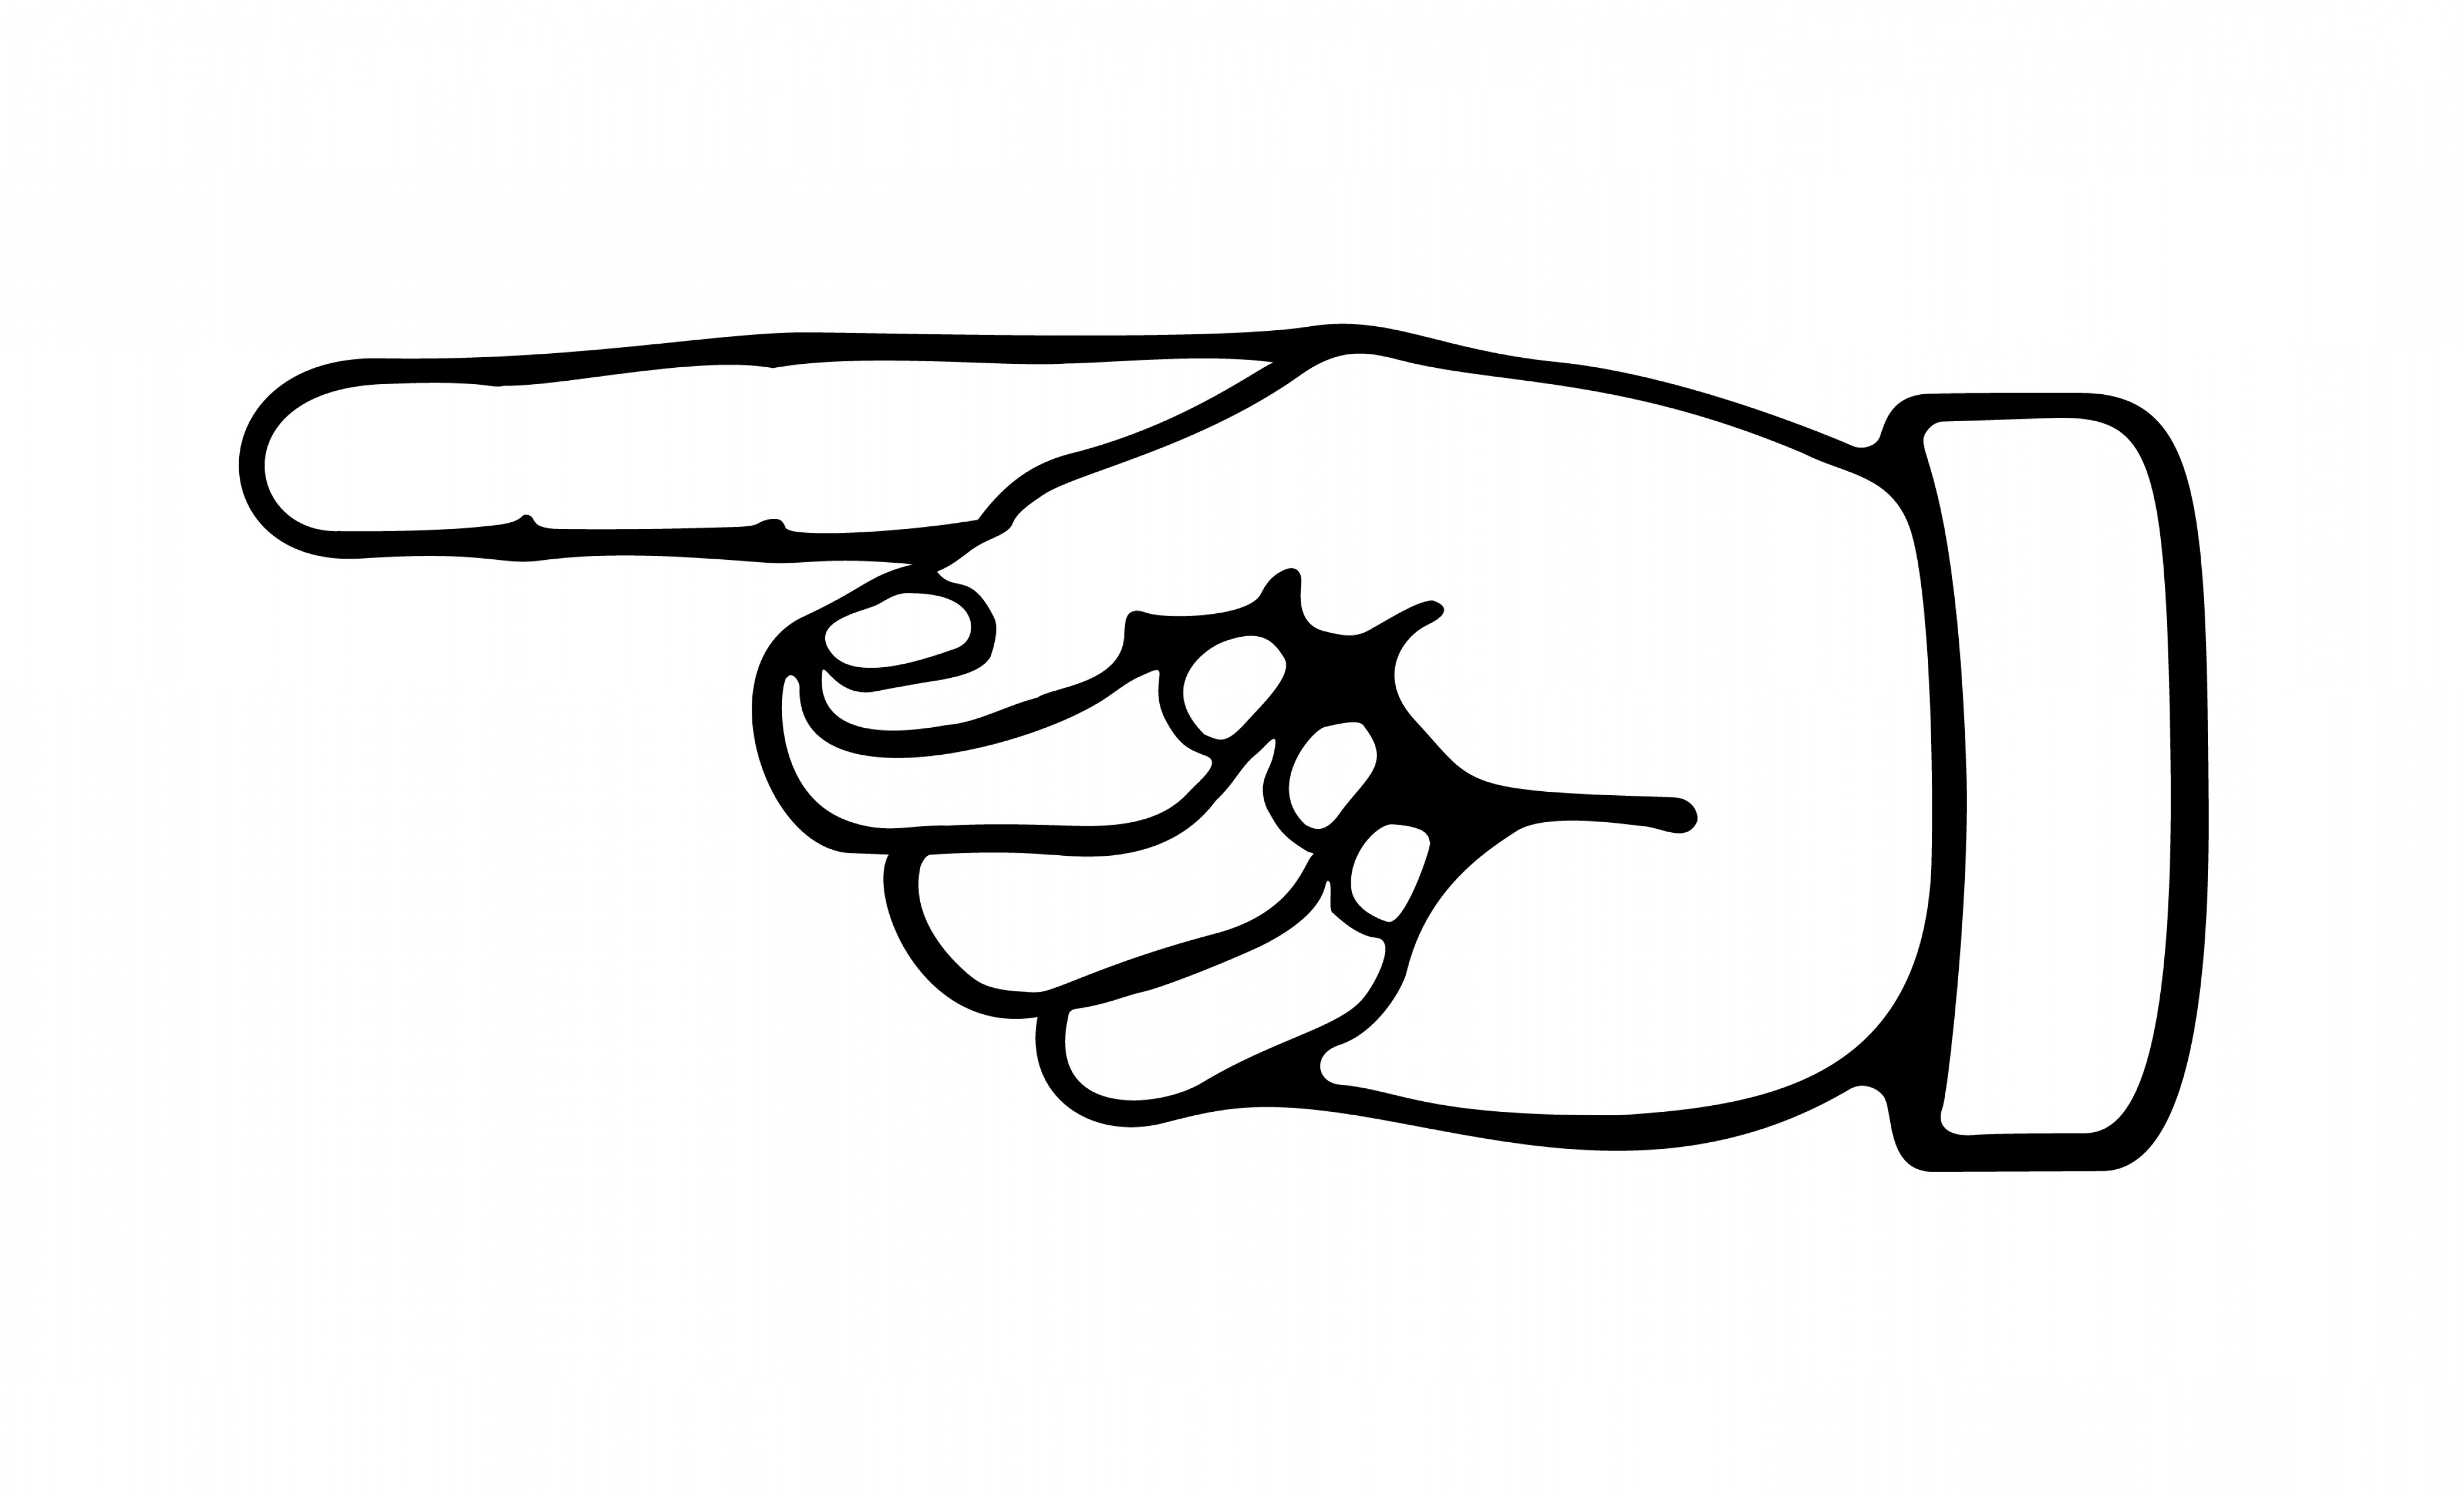 Pointing hand clipart jpg